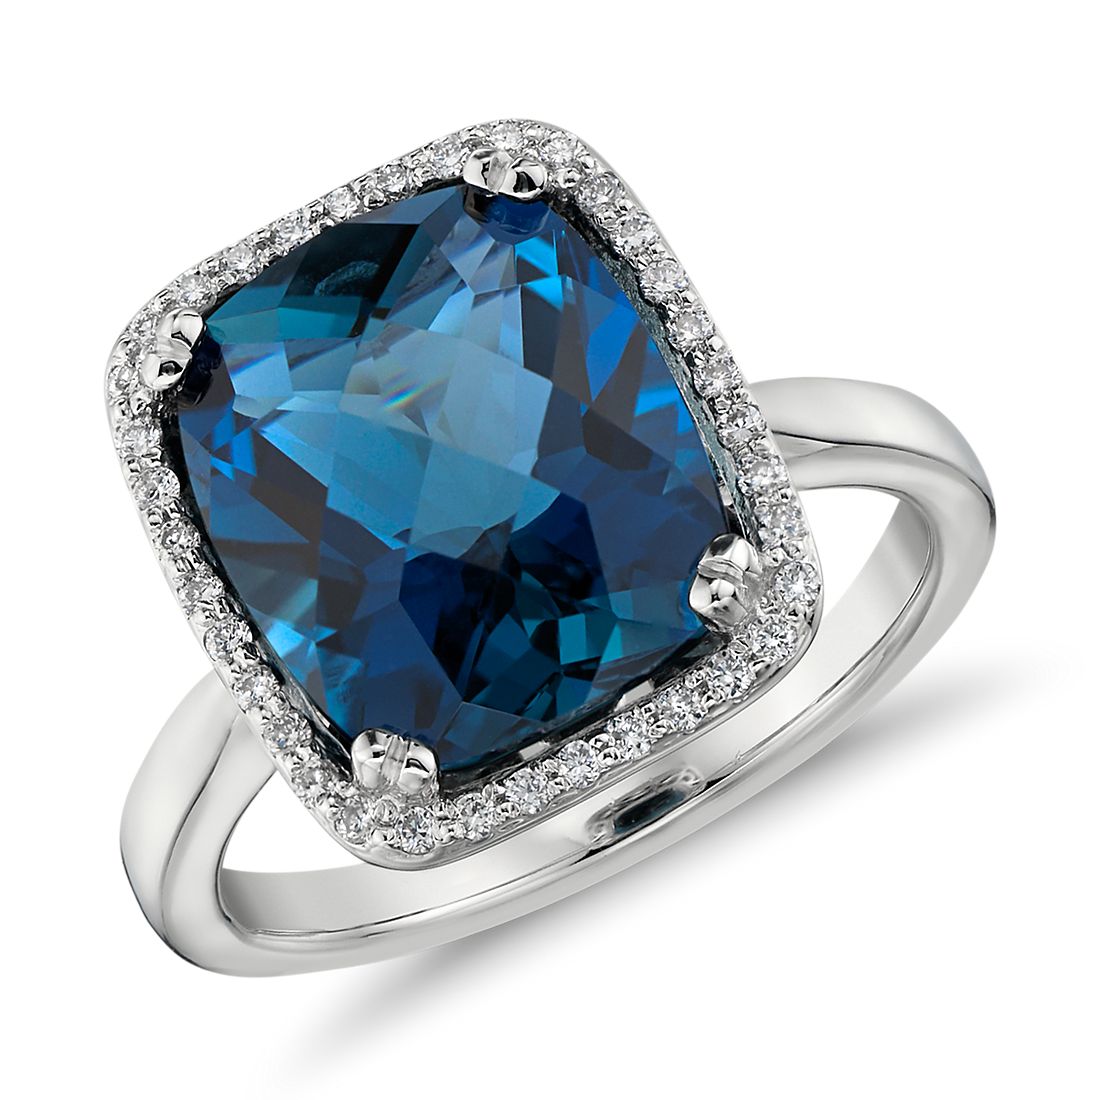 London Blue Topaz and Diamond Halo CushionCut Ring in 14k White Gold